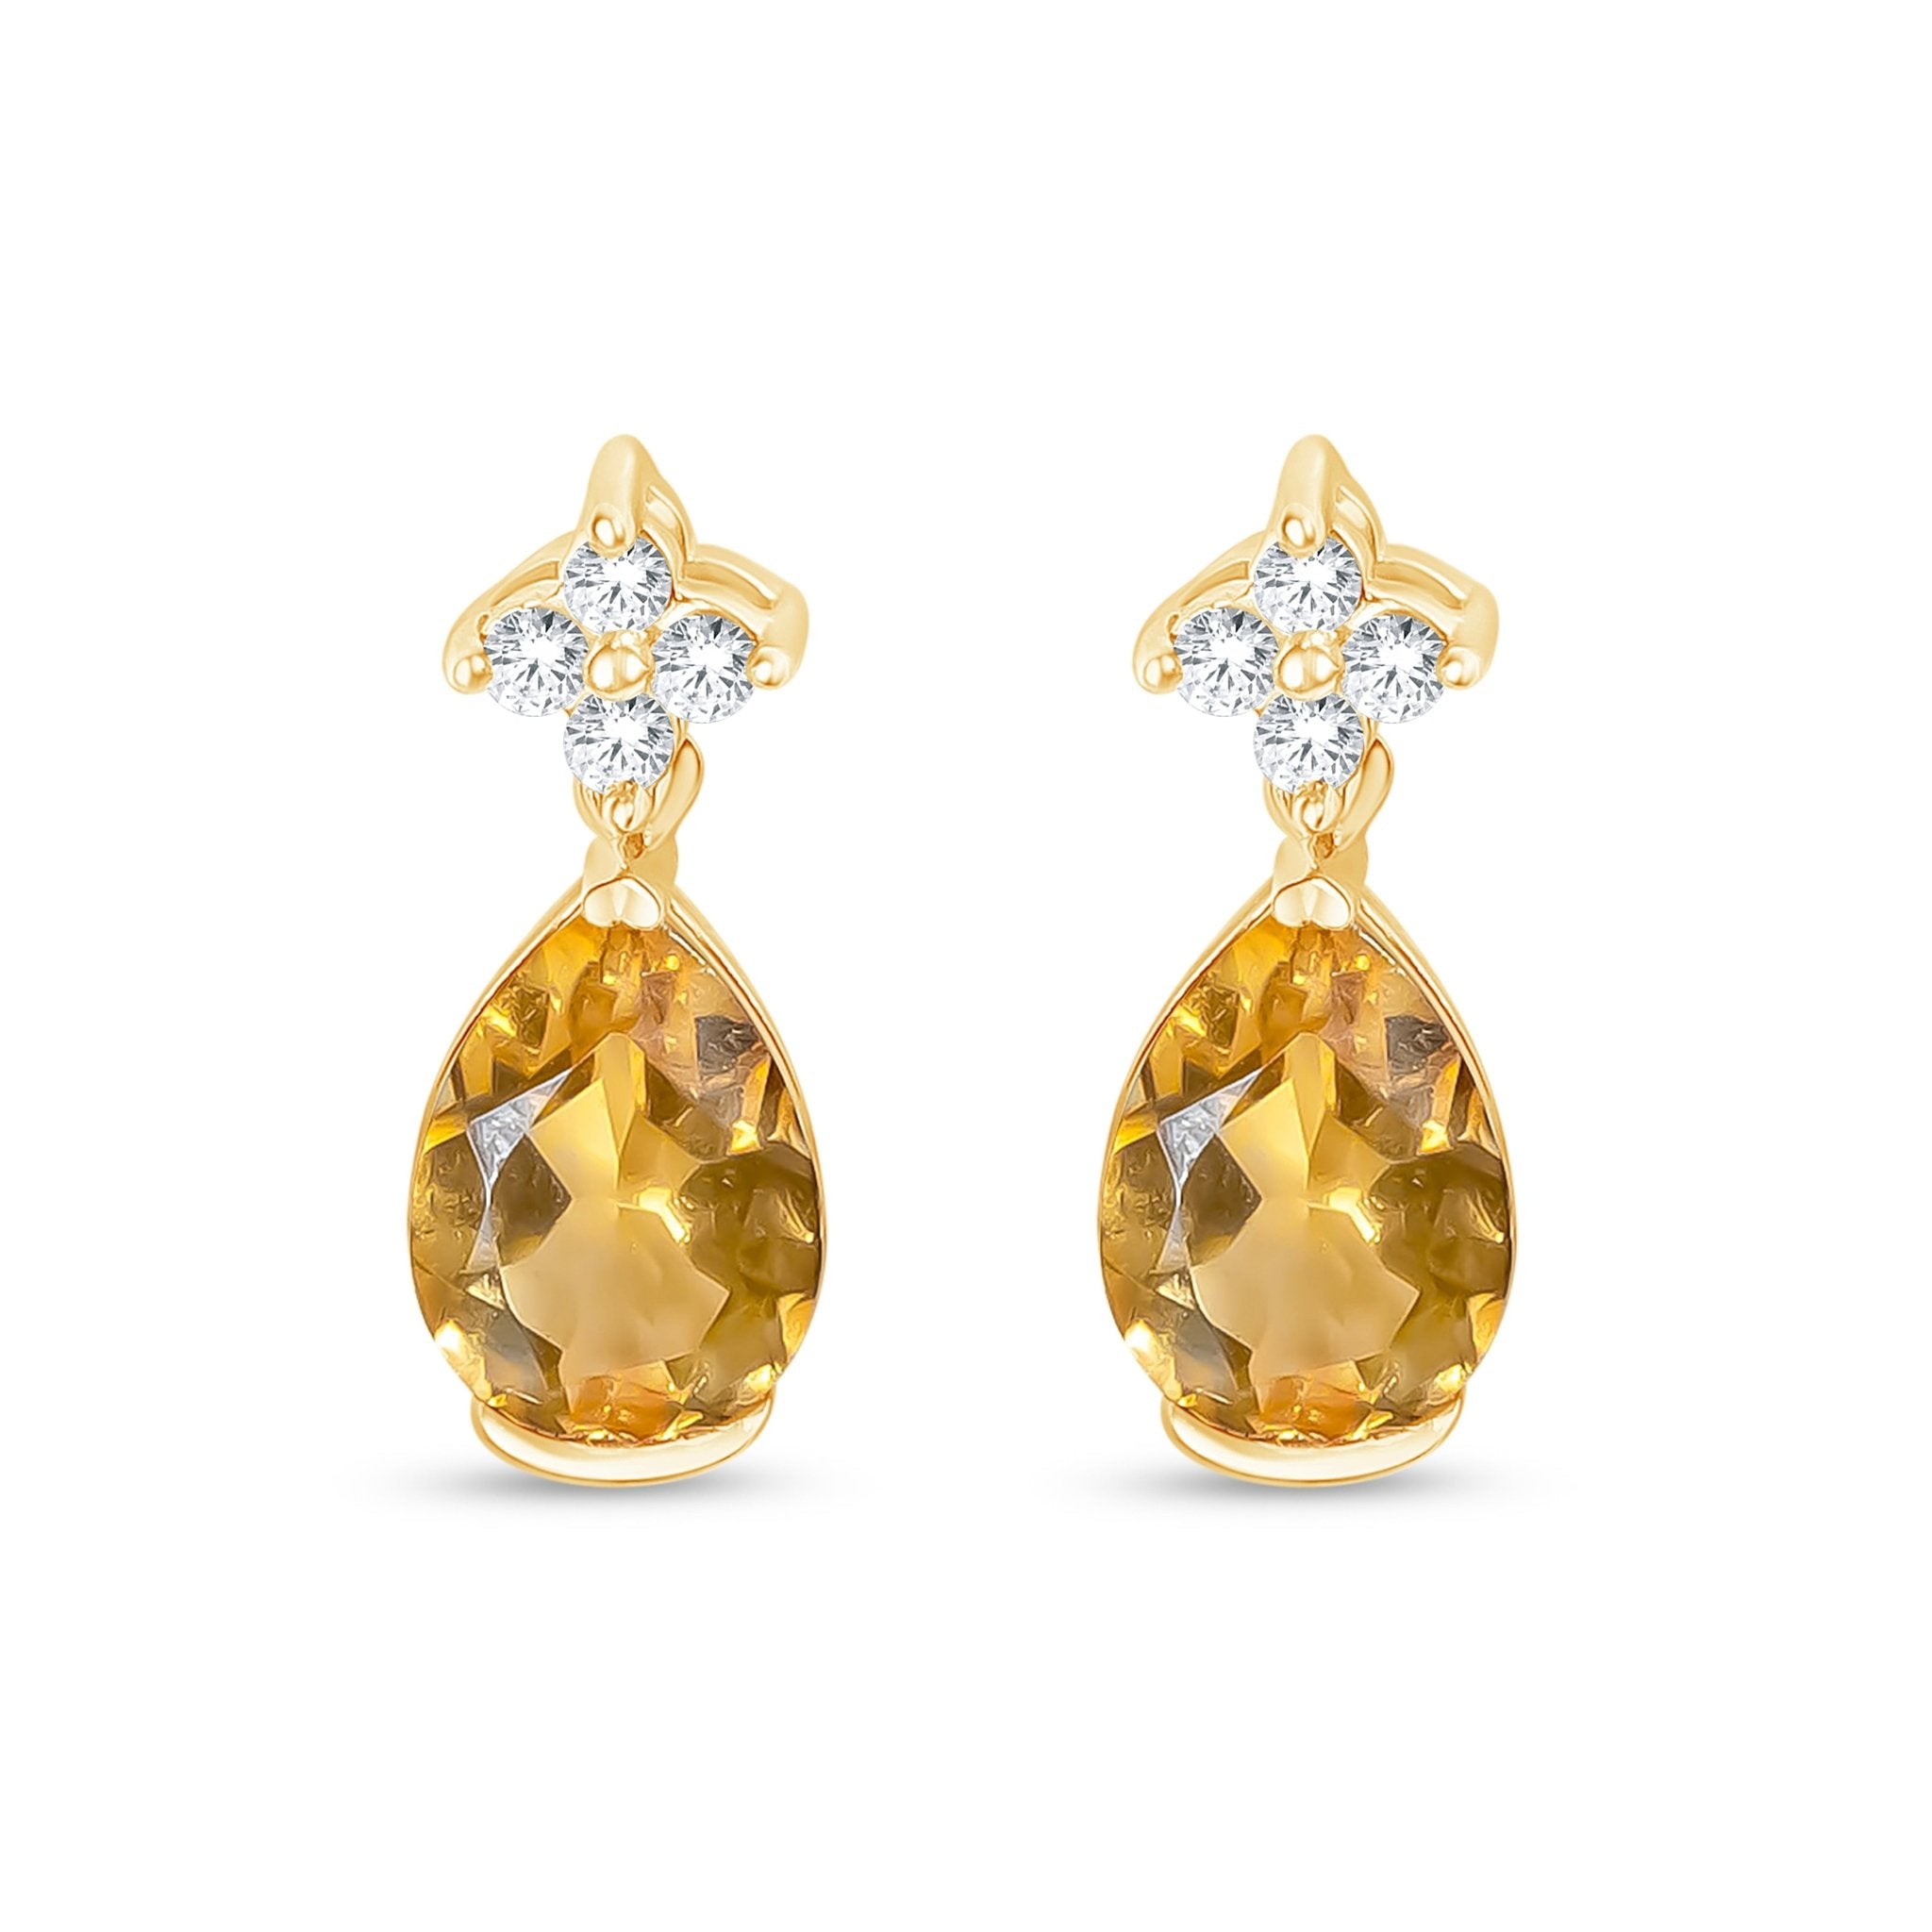 Sapphire Clover with Citrine Droplet Stud Earrings Earrings Estella Collection #product_description# 32652 Citrine Dangle Earrings Made to Order #tag4# #tag5# #tag6# #tag7# #tag8# #tag9# #tag10#